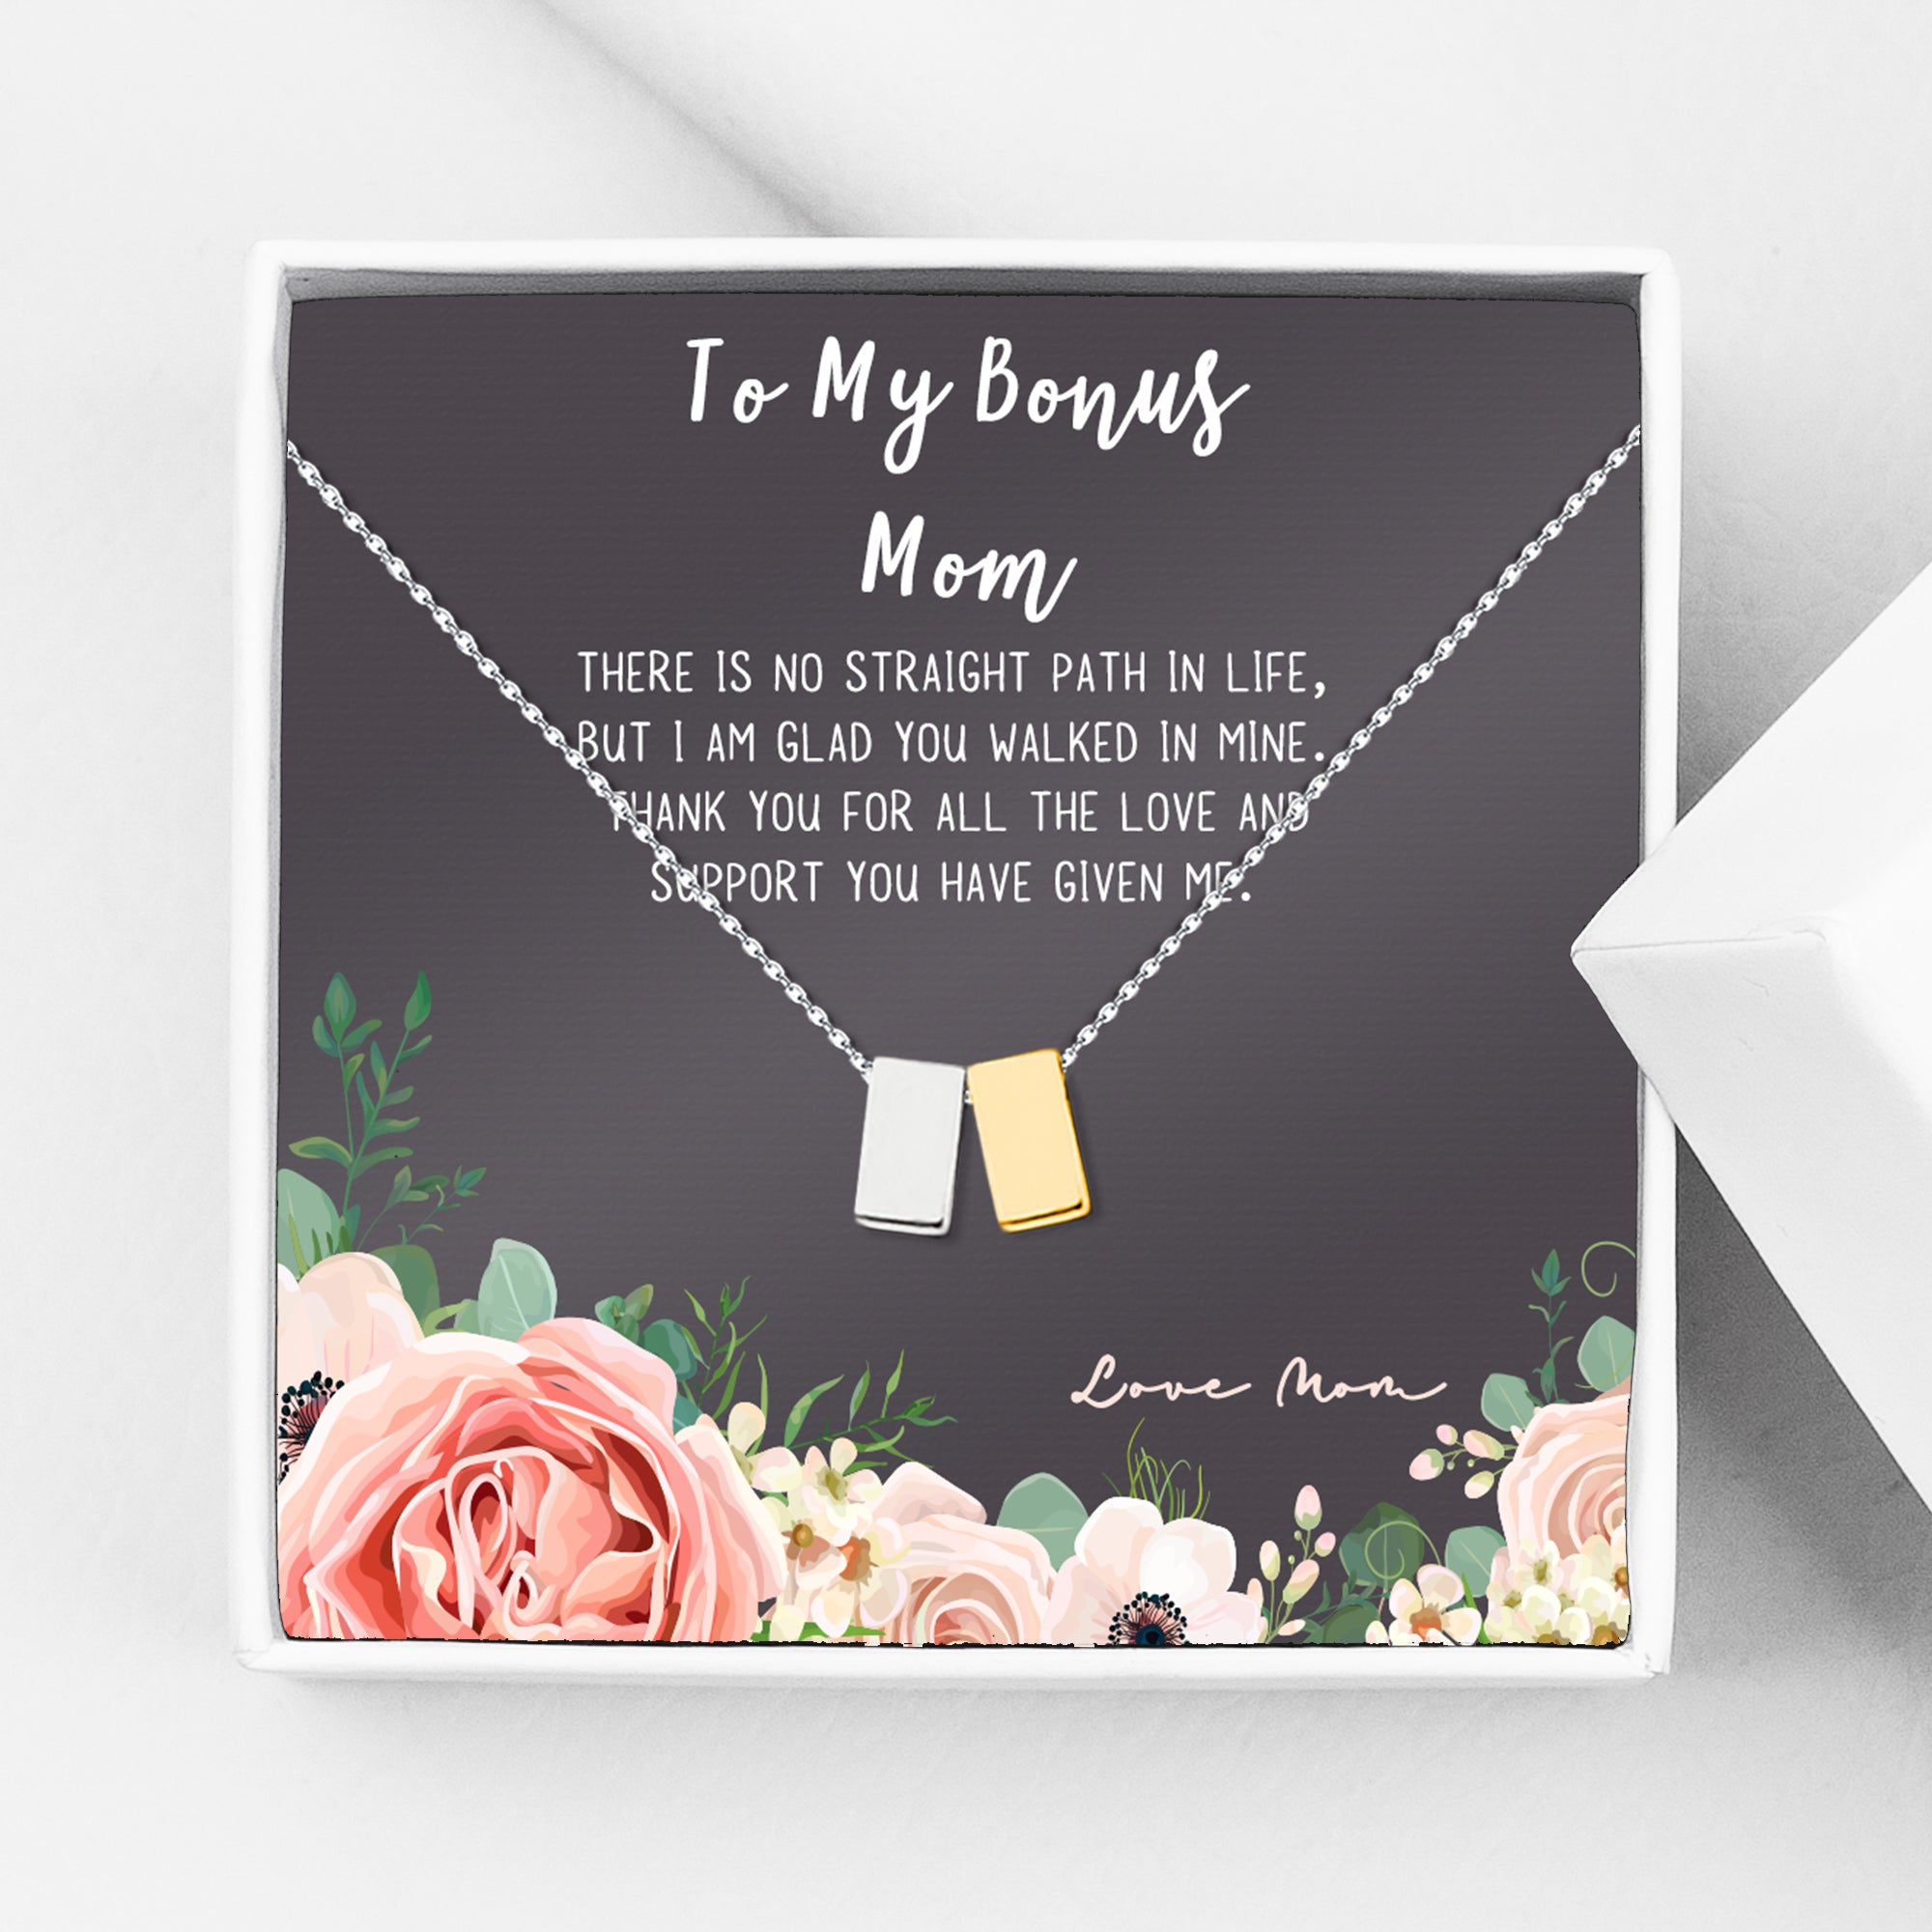 Anavia Step Mom Gift, Gift for Other Mom, Cube Necklace Jewelry Gift,  Mothers Day Gift, Birthday Gift for Her,Two Cube Necklaces with Wish Card  [1